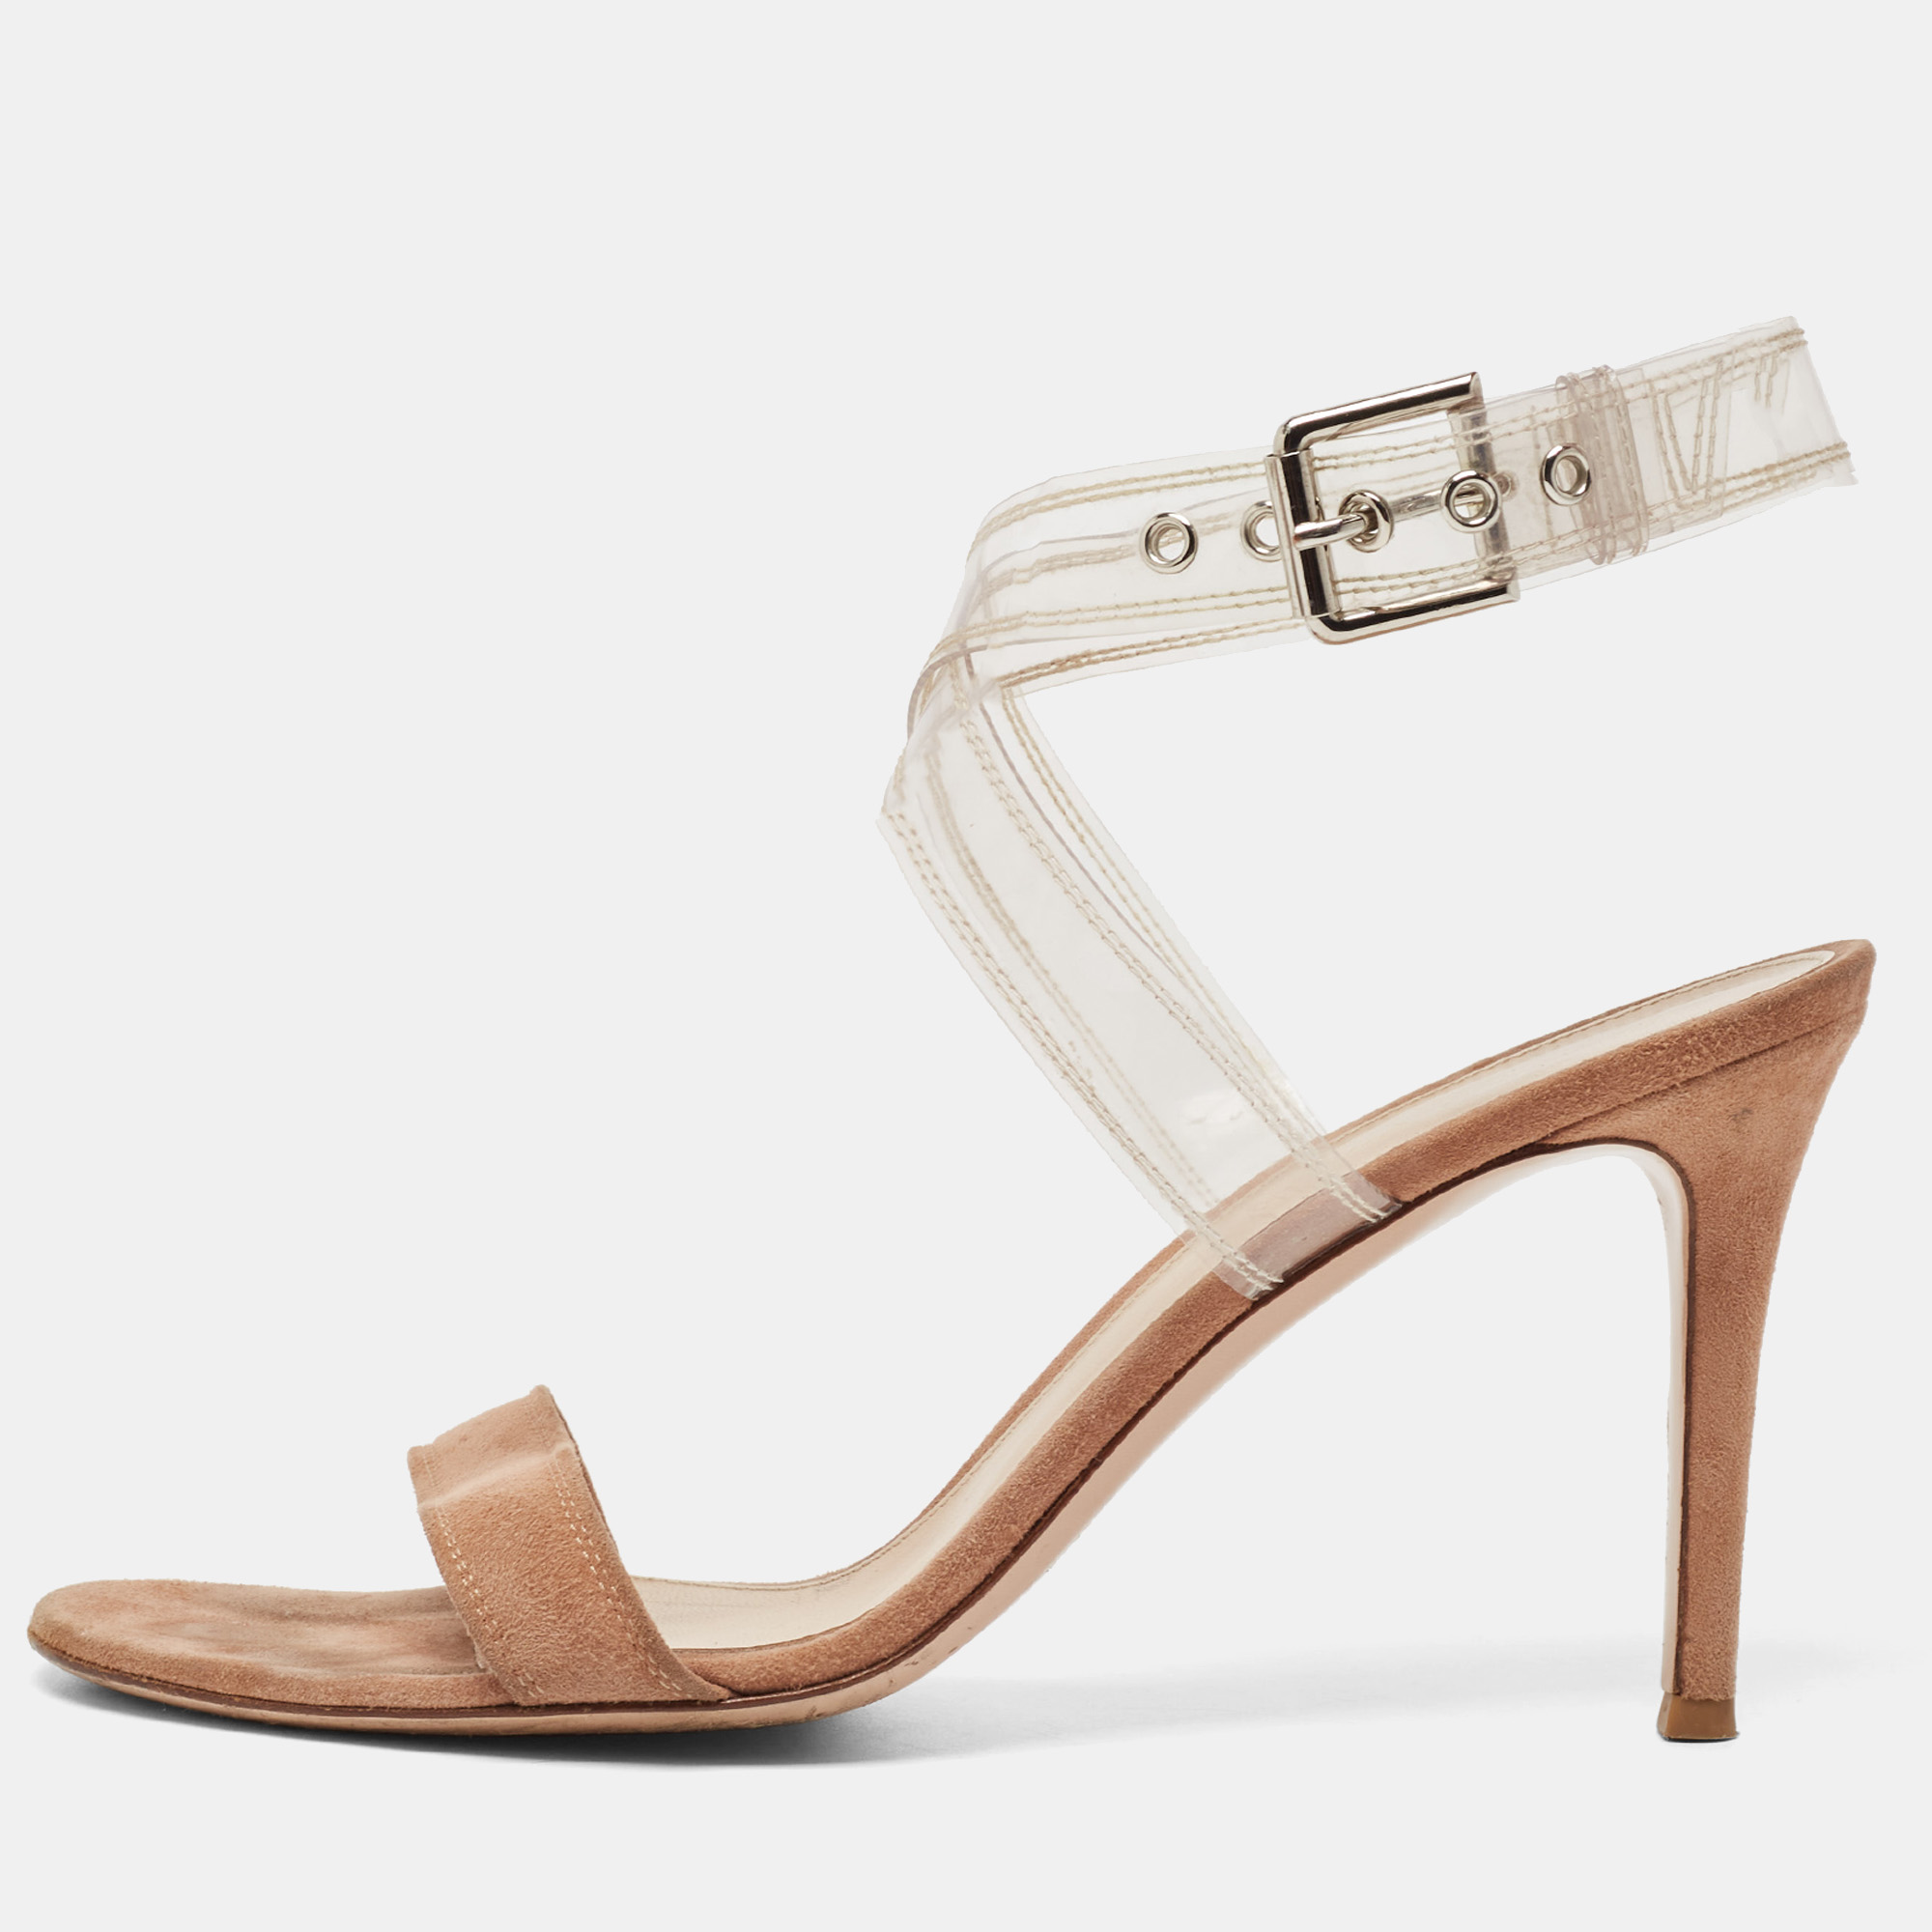 Gianvito rossi beige suede and pvc ankle strap sandals size 40